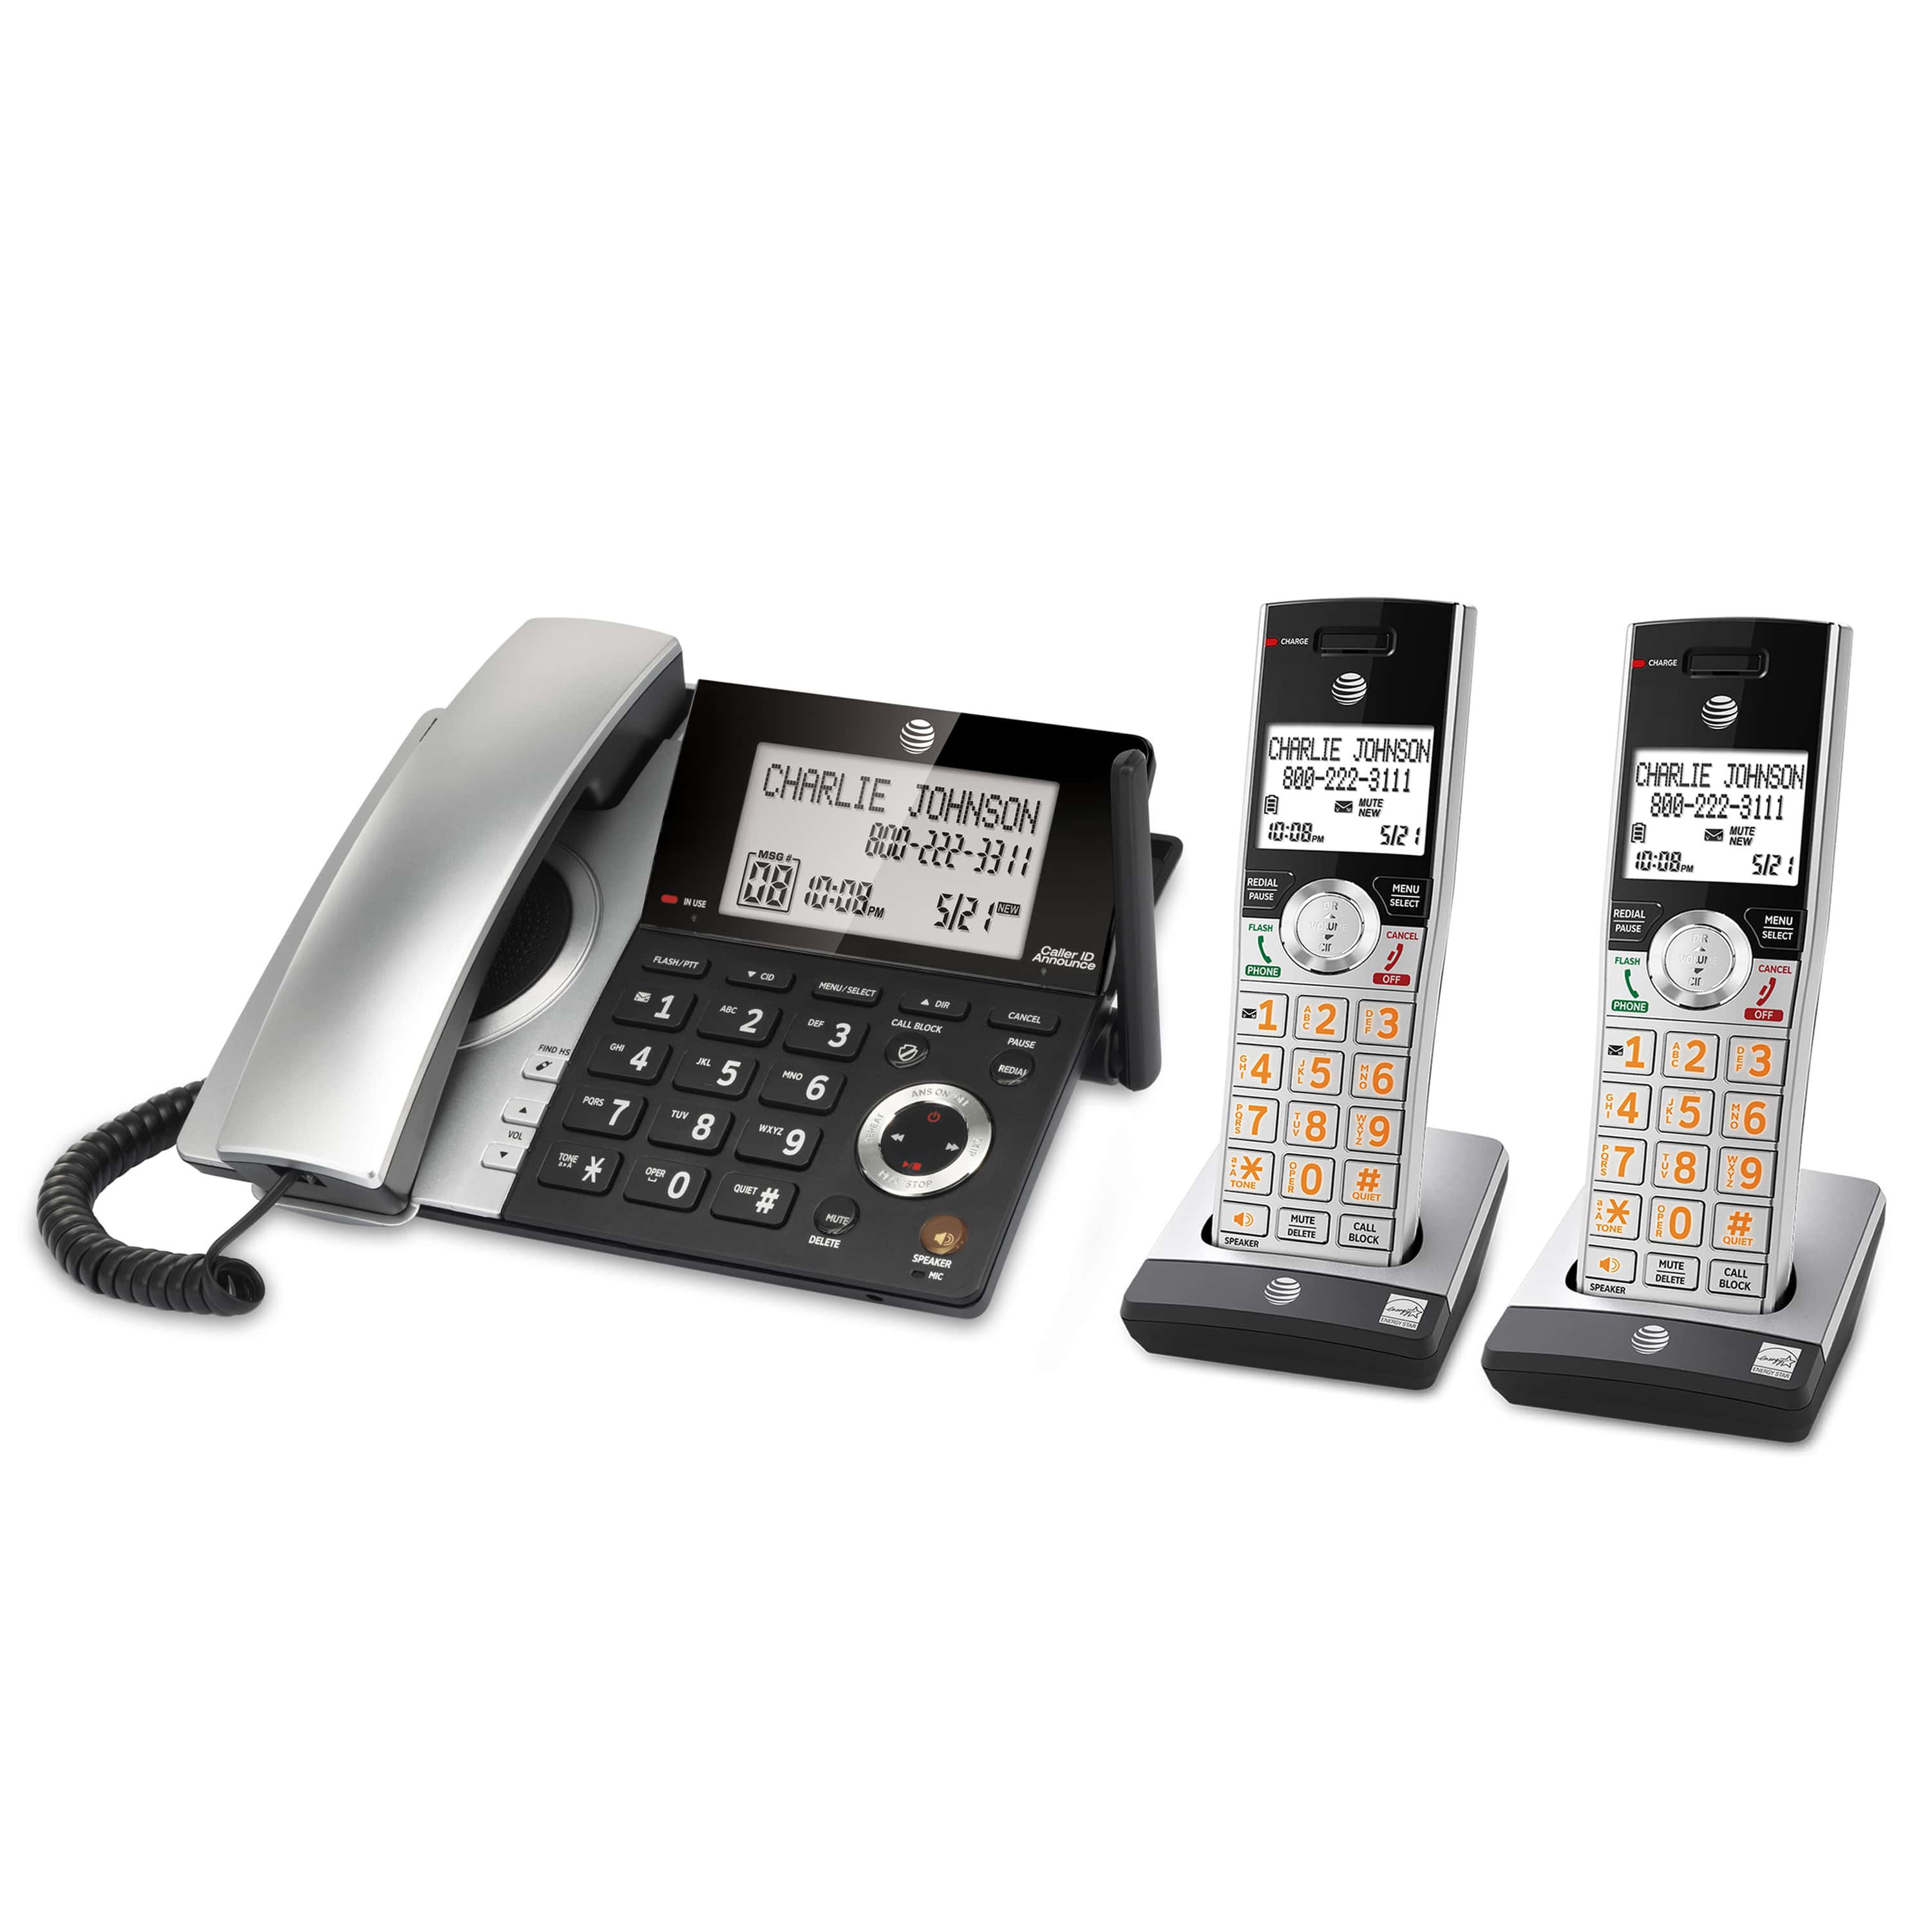 2 handset corded/cordless phone system with smart call blocker - view 3